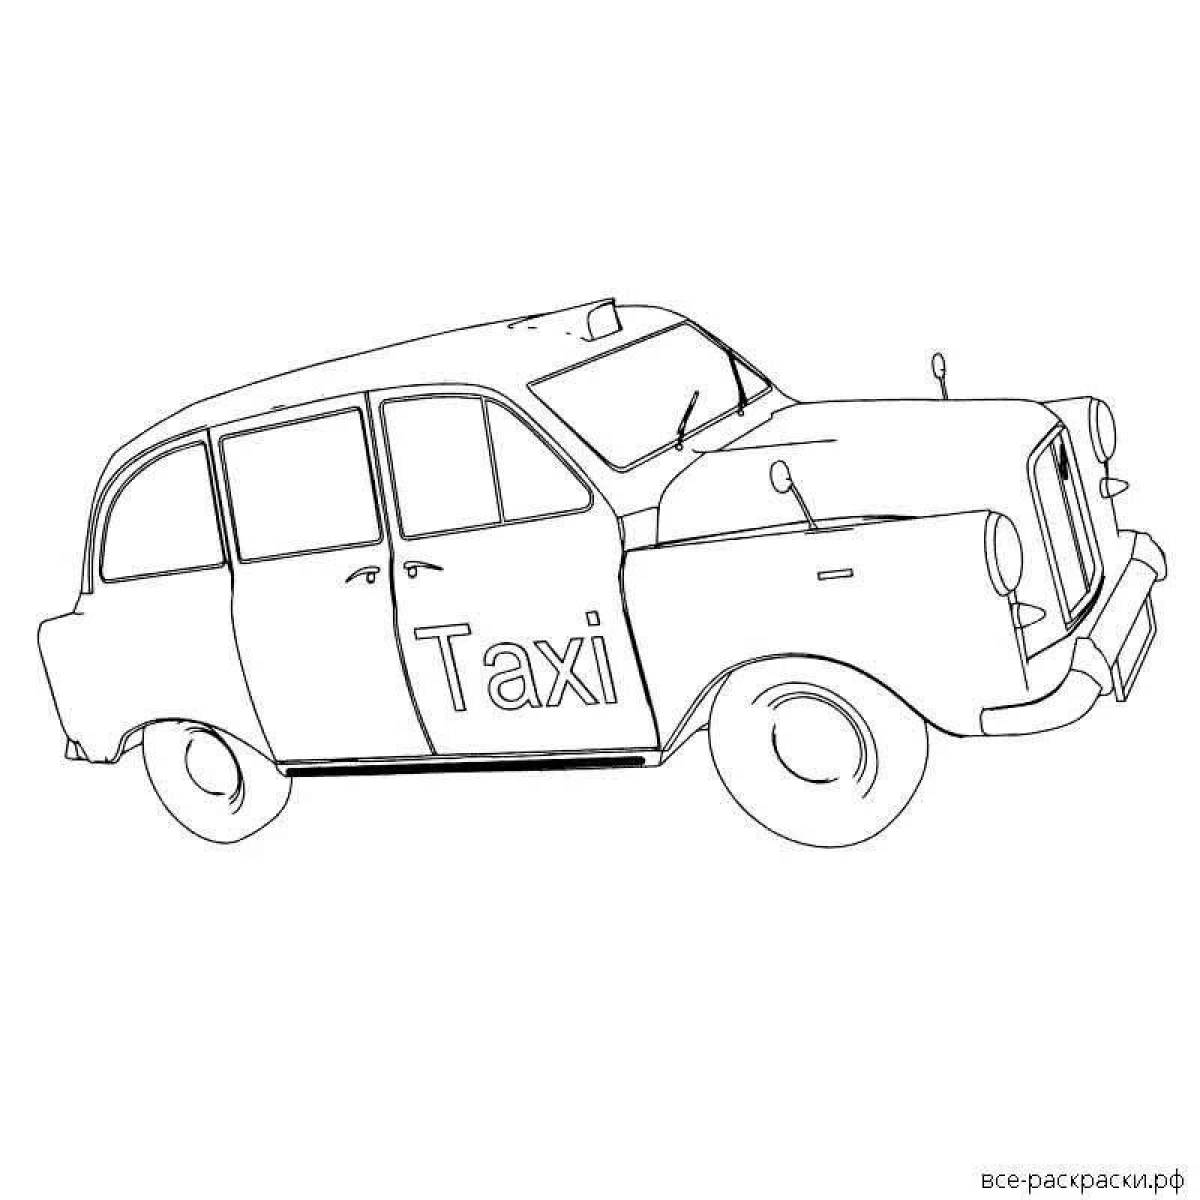 Radiant taxi yandex coloring book